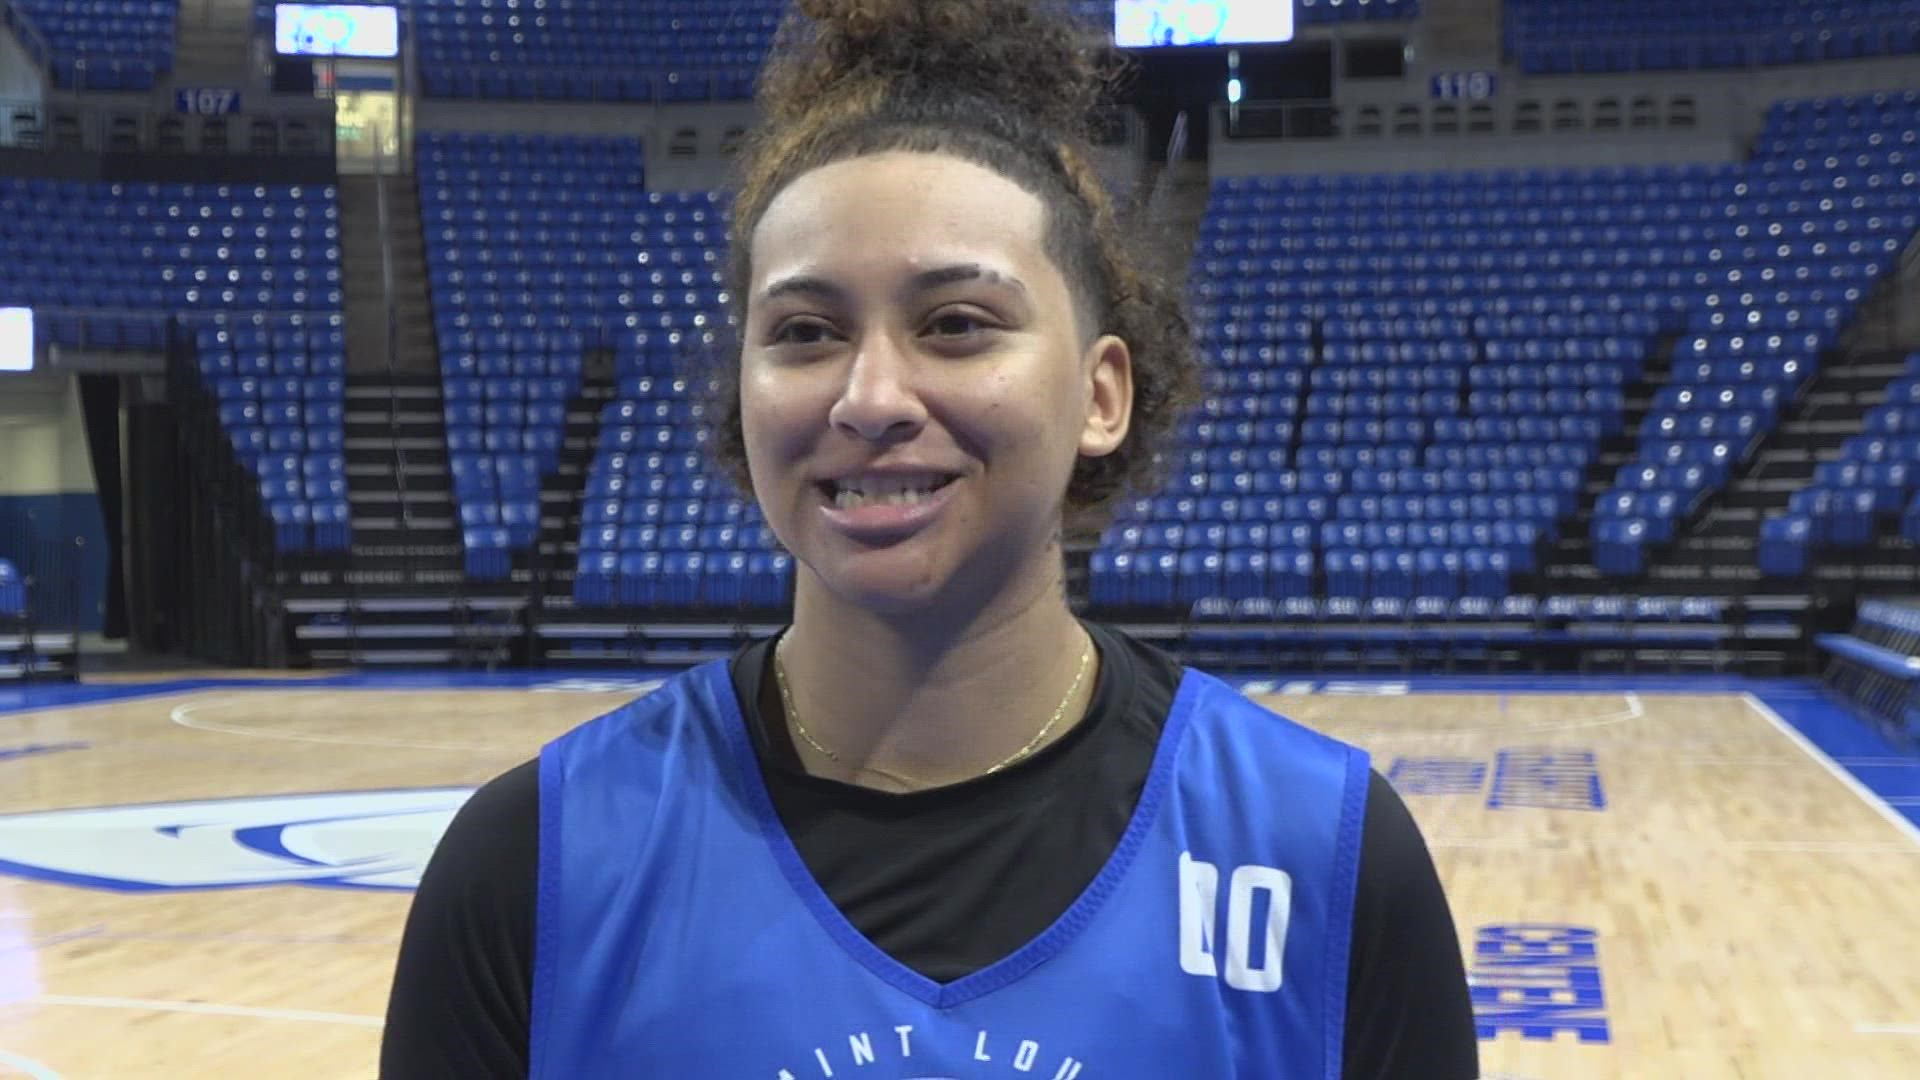 Senior guard Kyla McMakin tallied 40 points against VCU over the weekend.